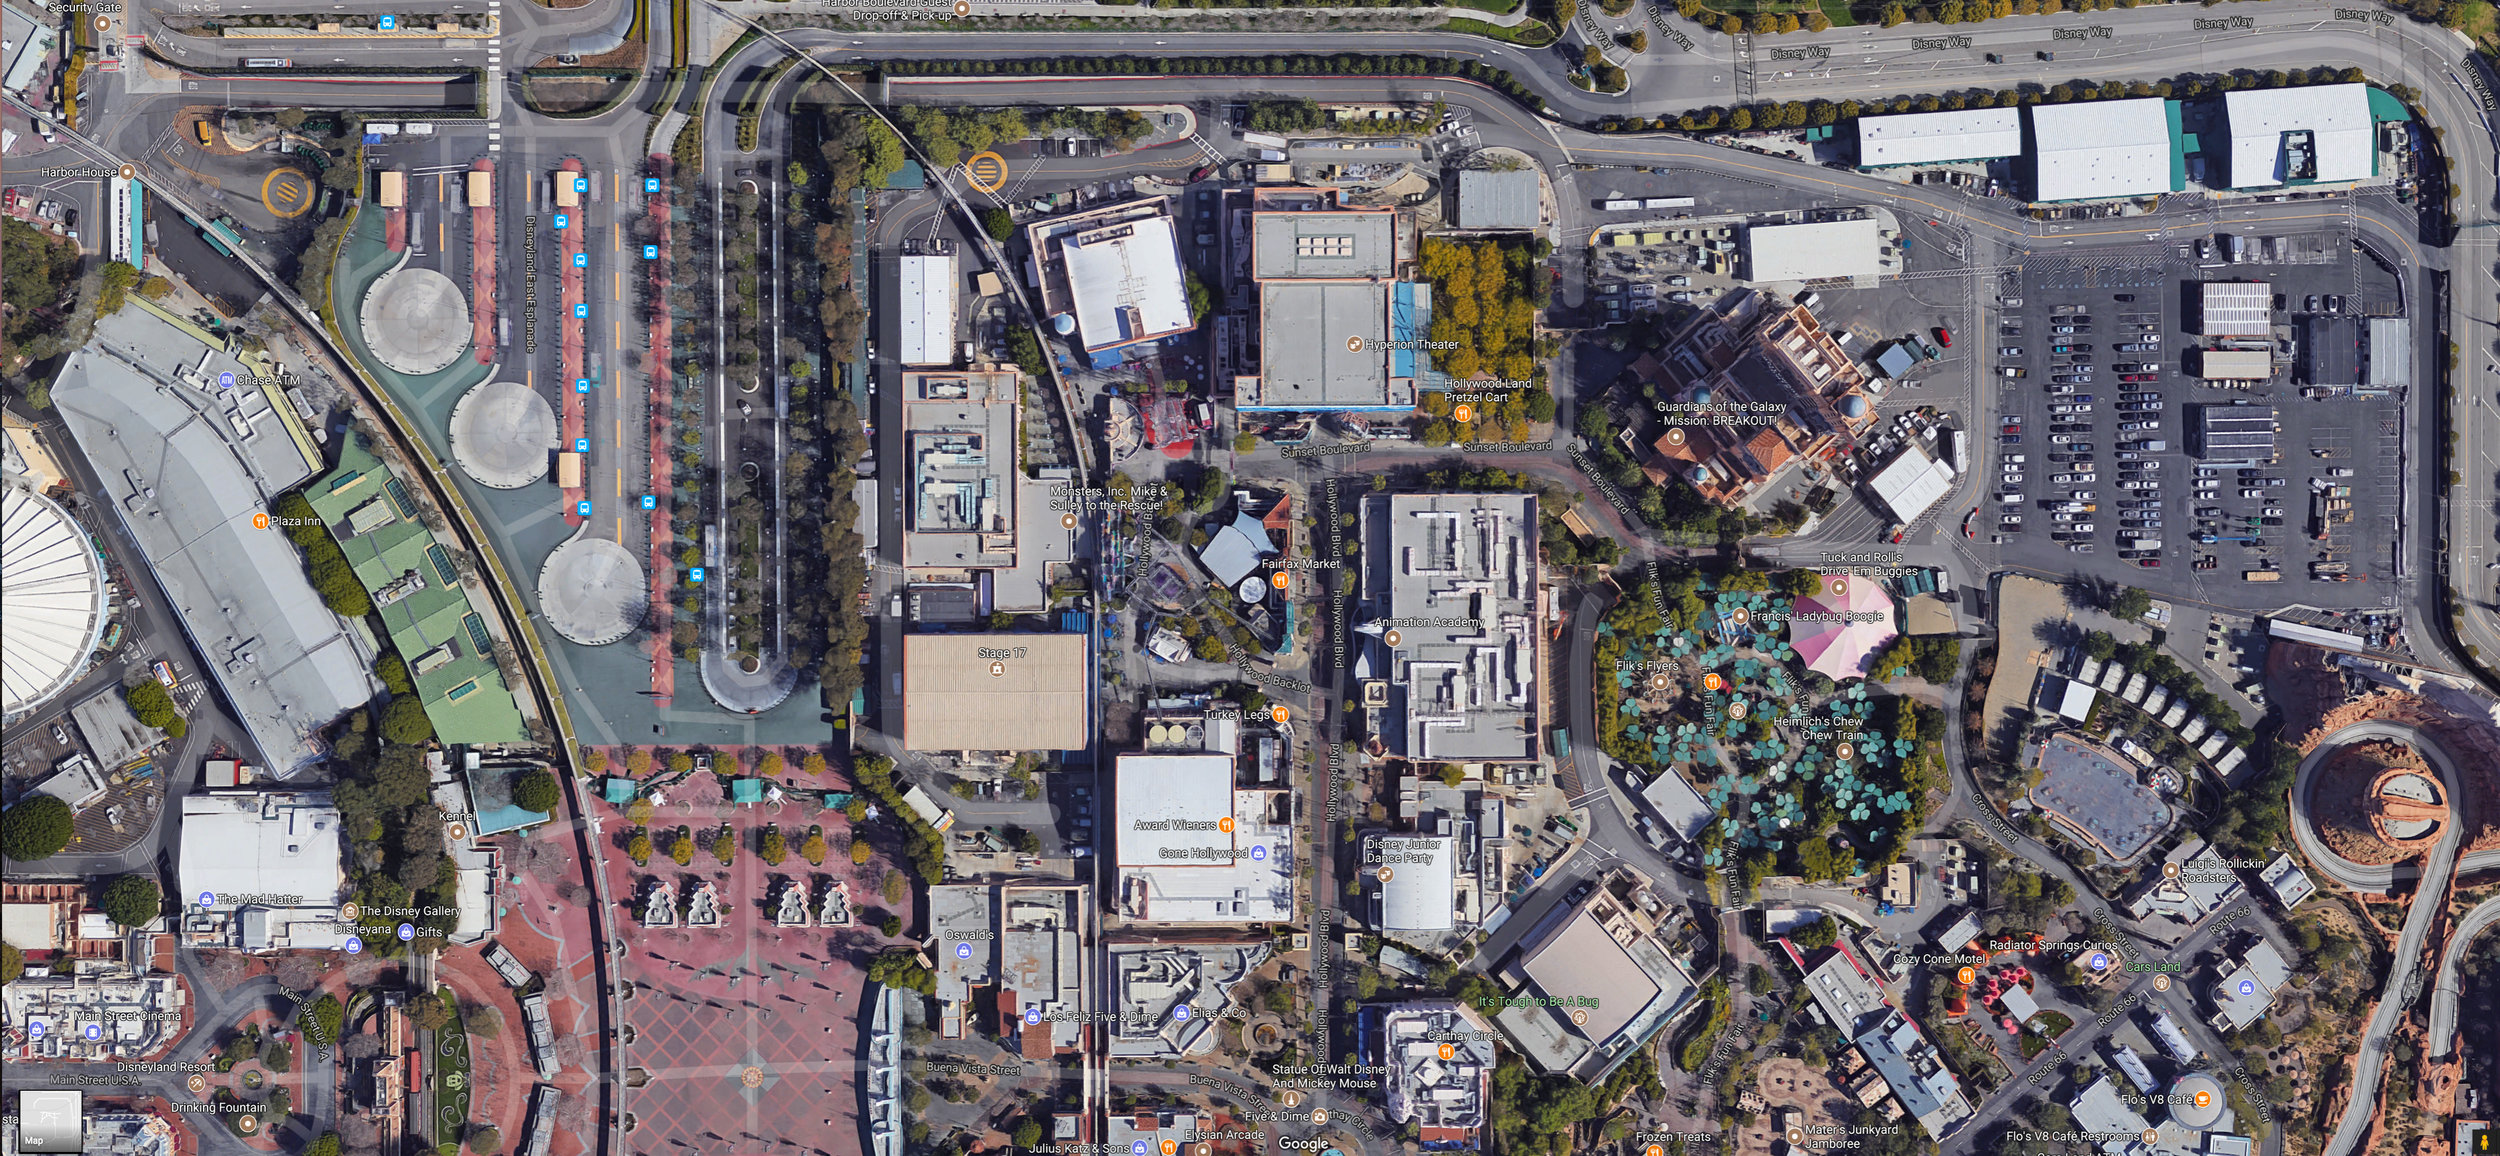  Current long term land available for Marvel Land expansion project. 